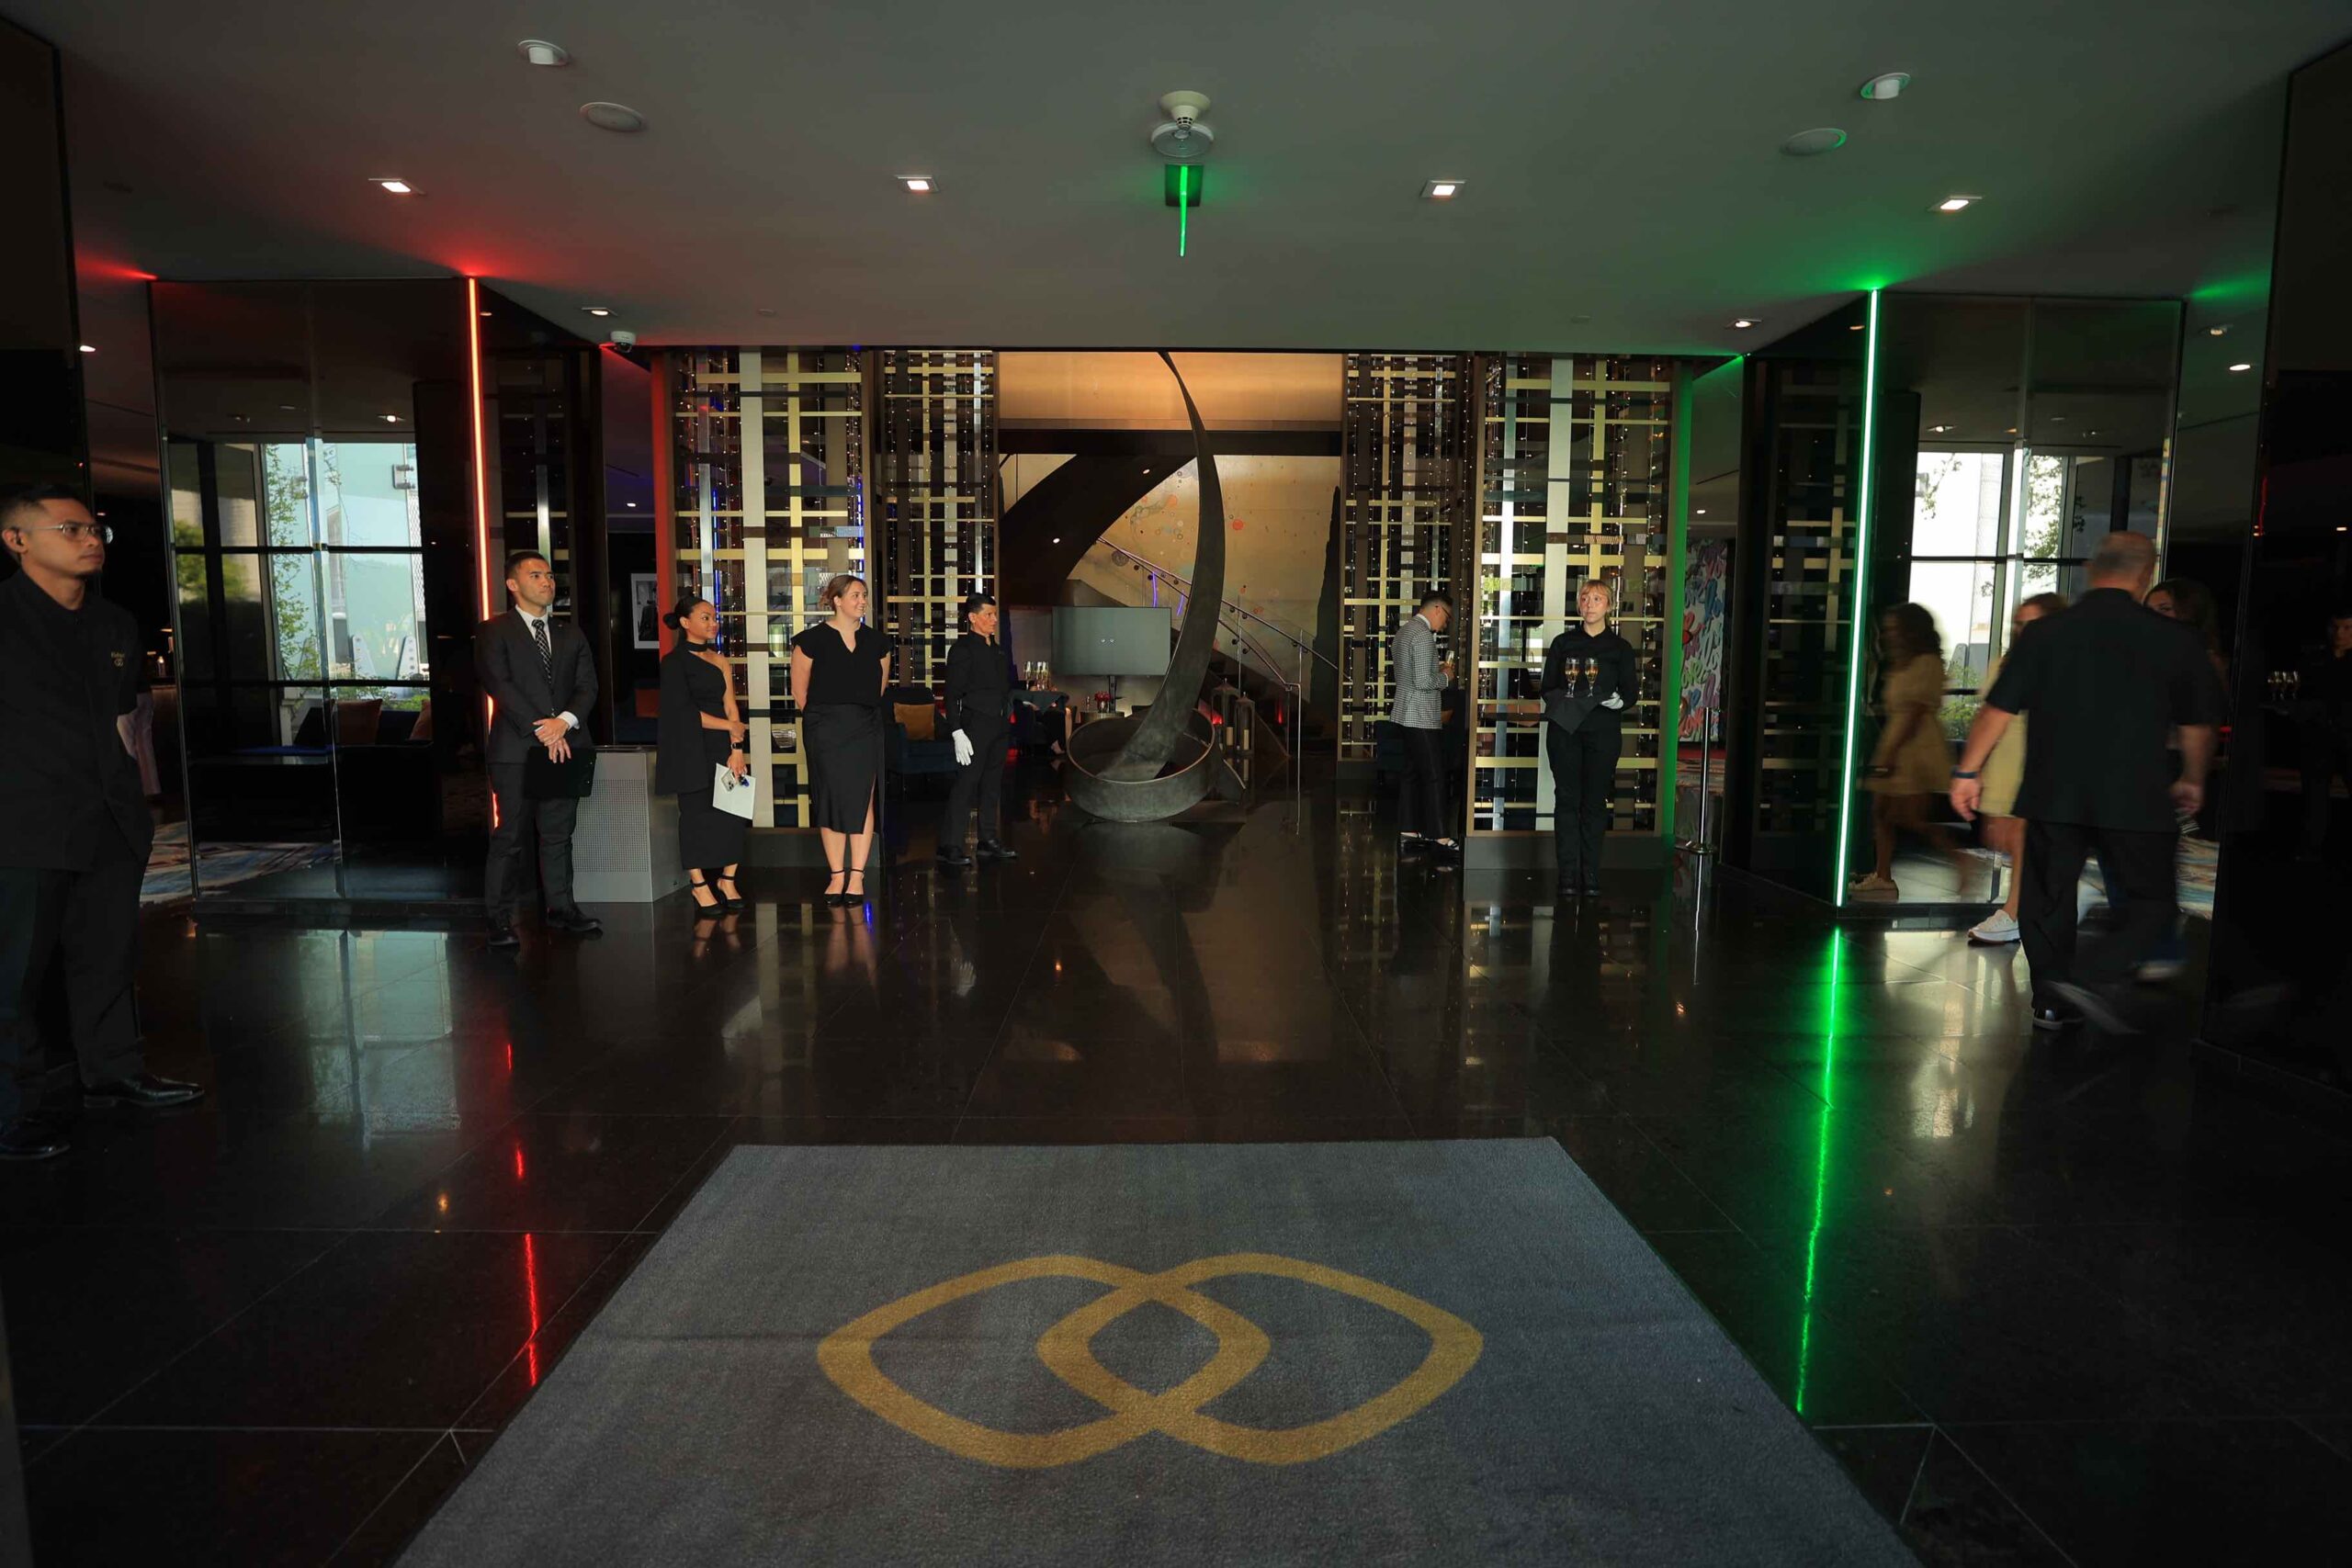 An image of the lobby of the Sofitel.